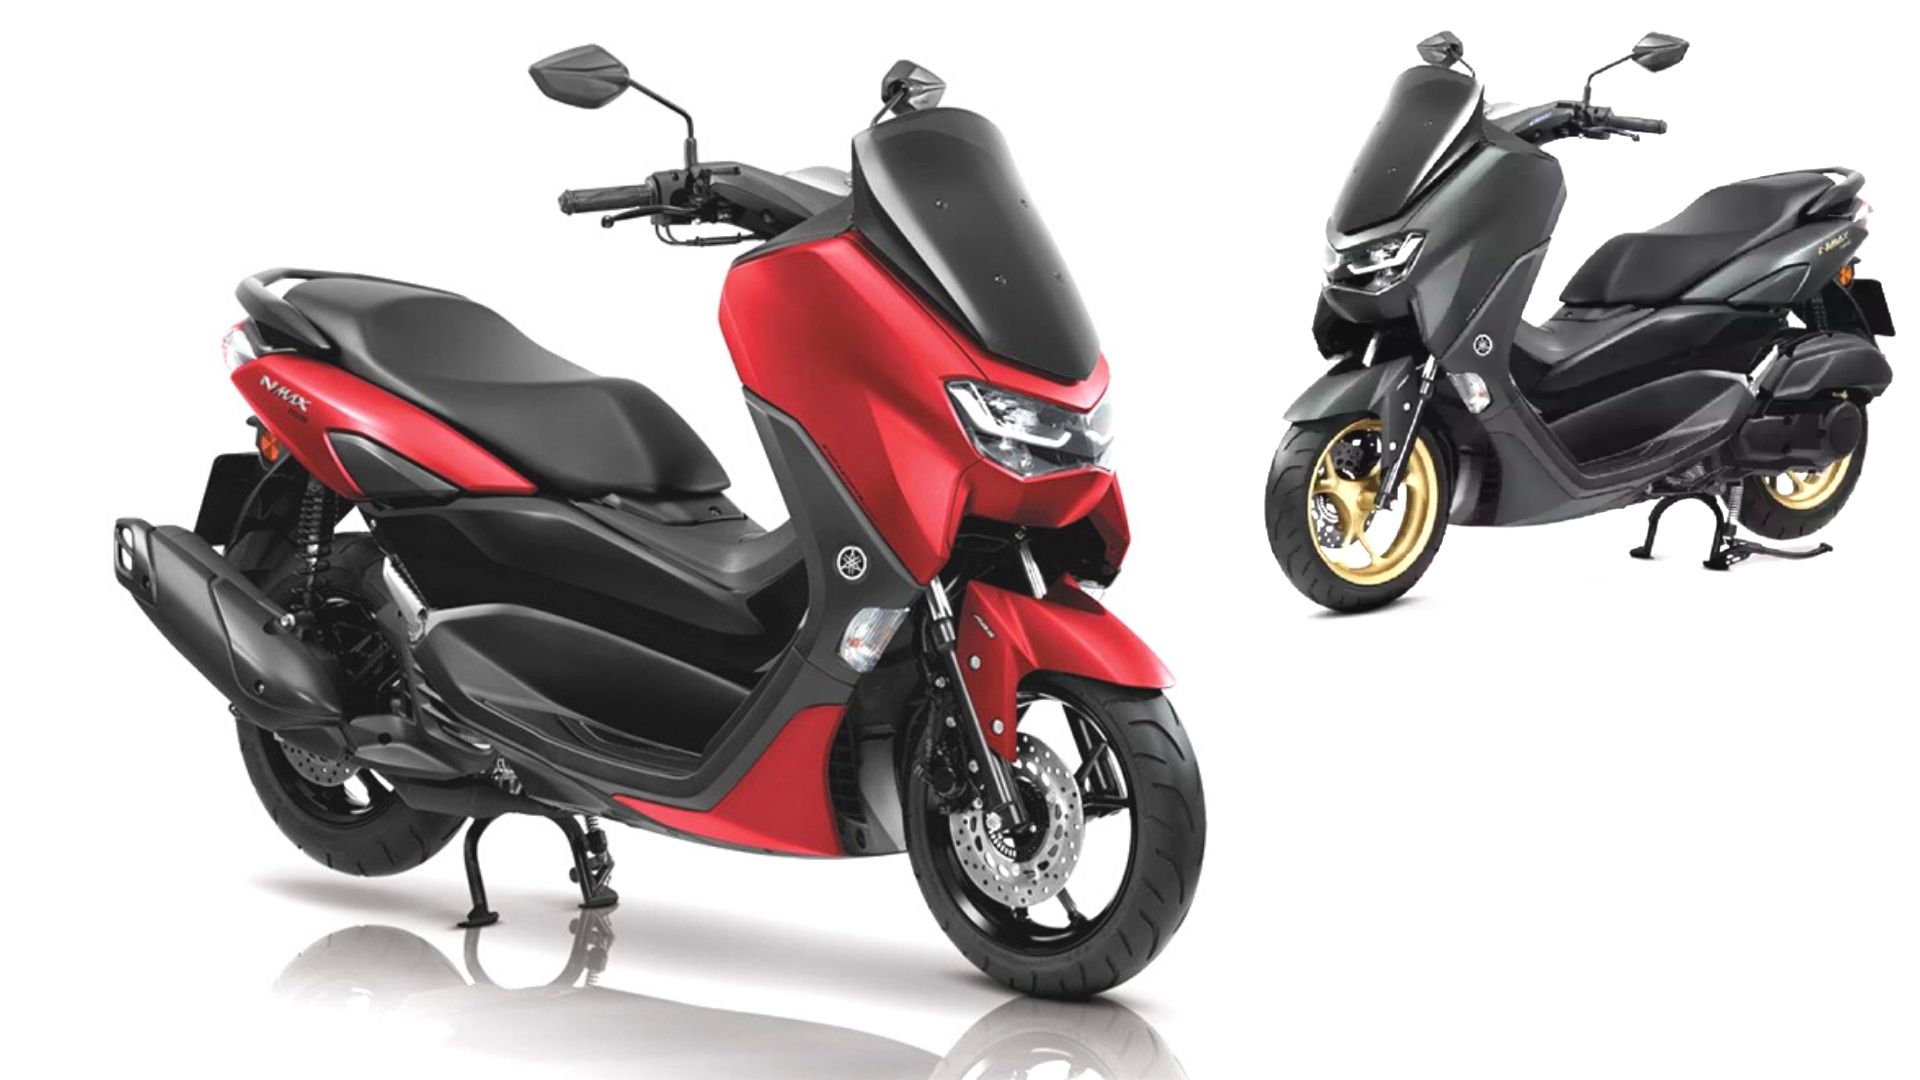 2020 Yamaha Nmax 155 Launched With Many Updates 